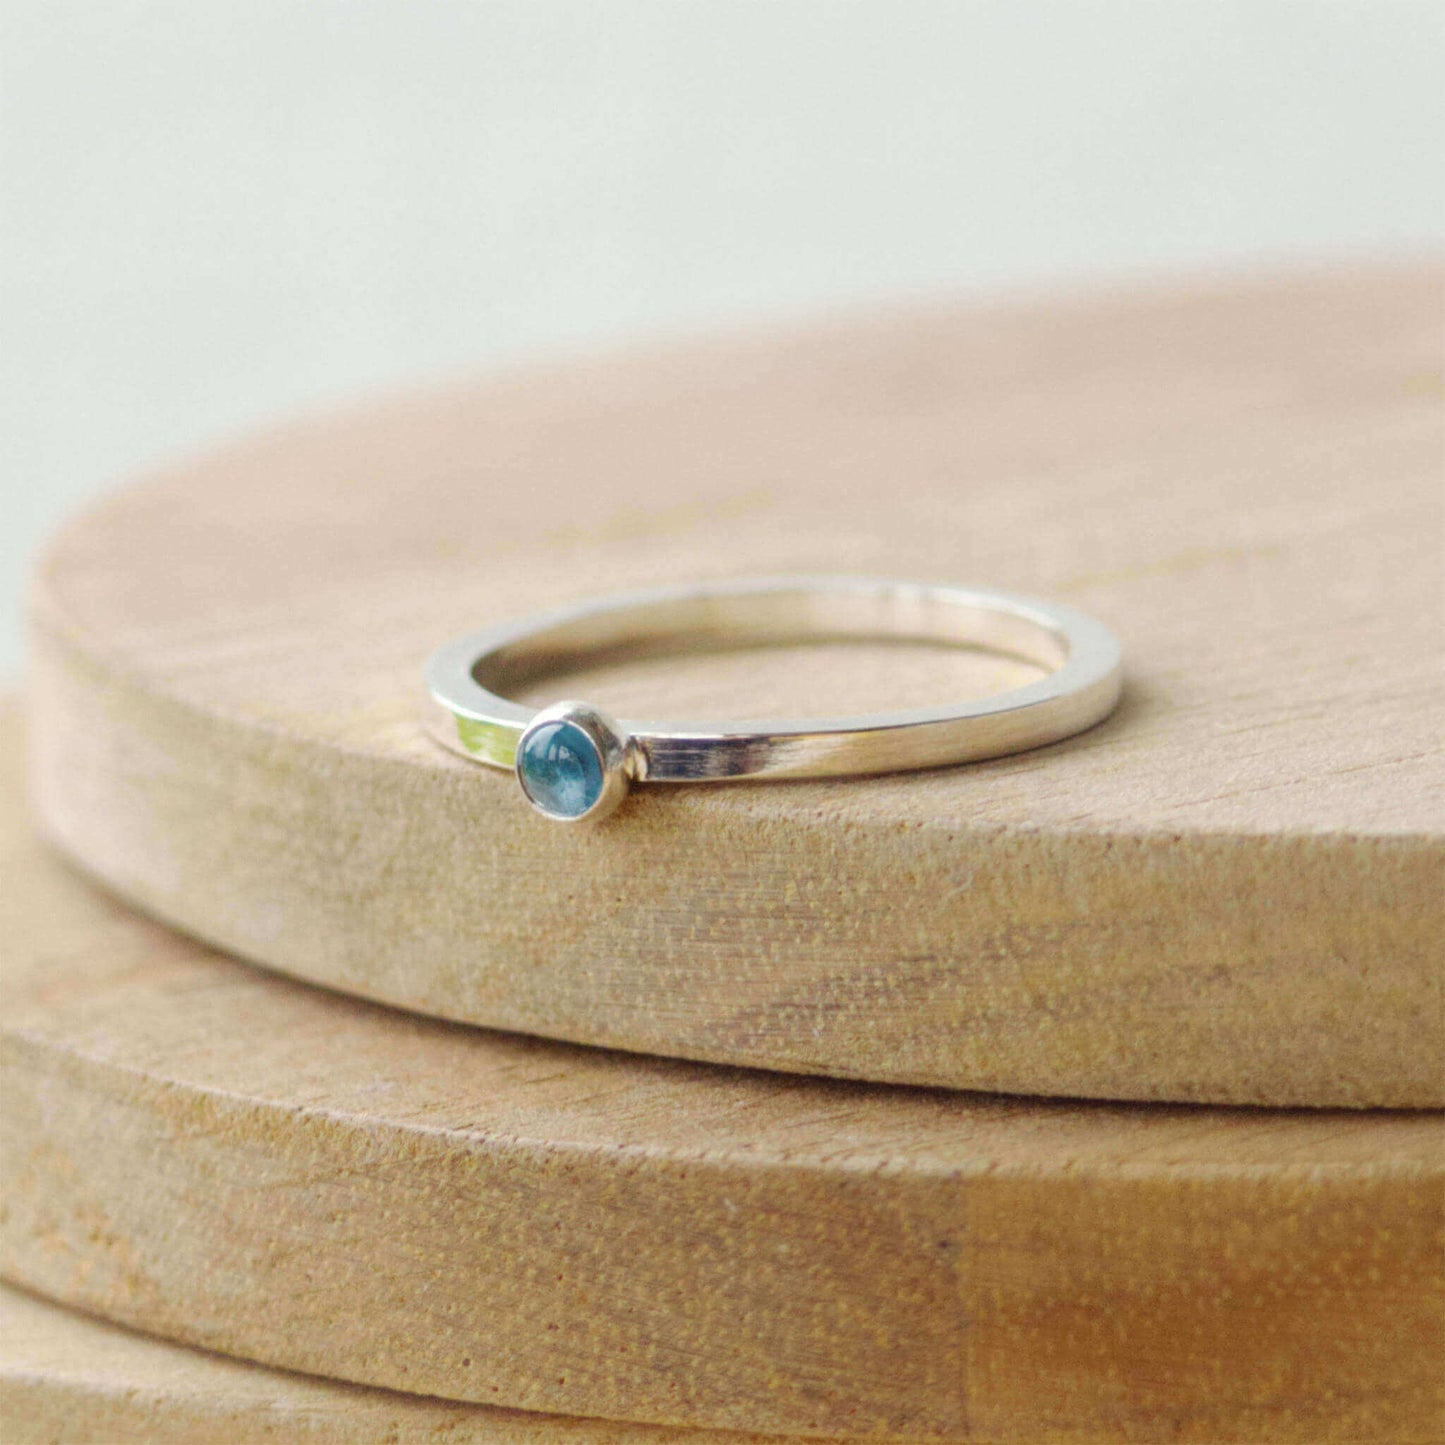 Small gemstone ring in sterling silver with a modern square band with a 3mm sized round light blue Aquamarine. Handmade in Edinburgh by Maram Jewellery